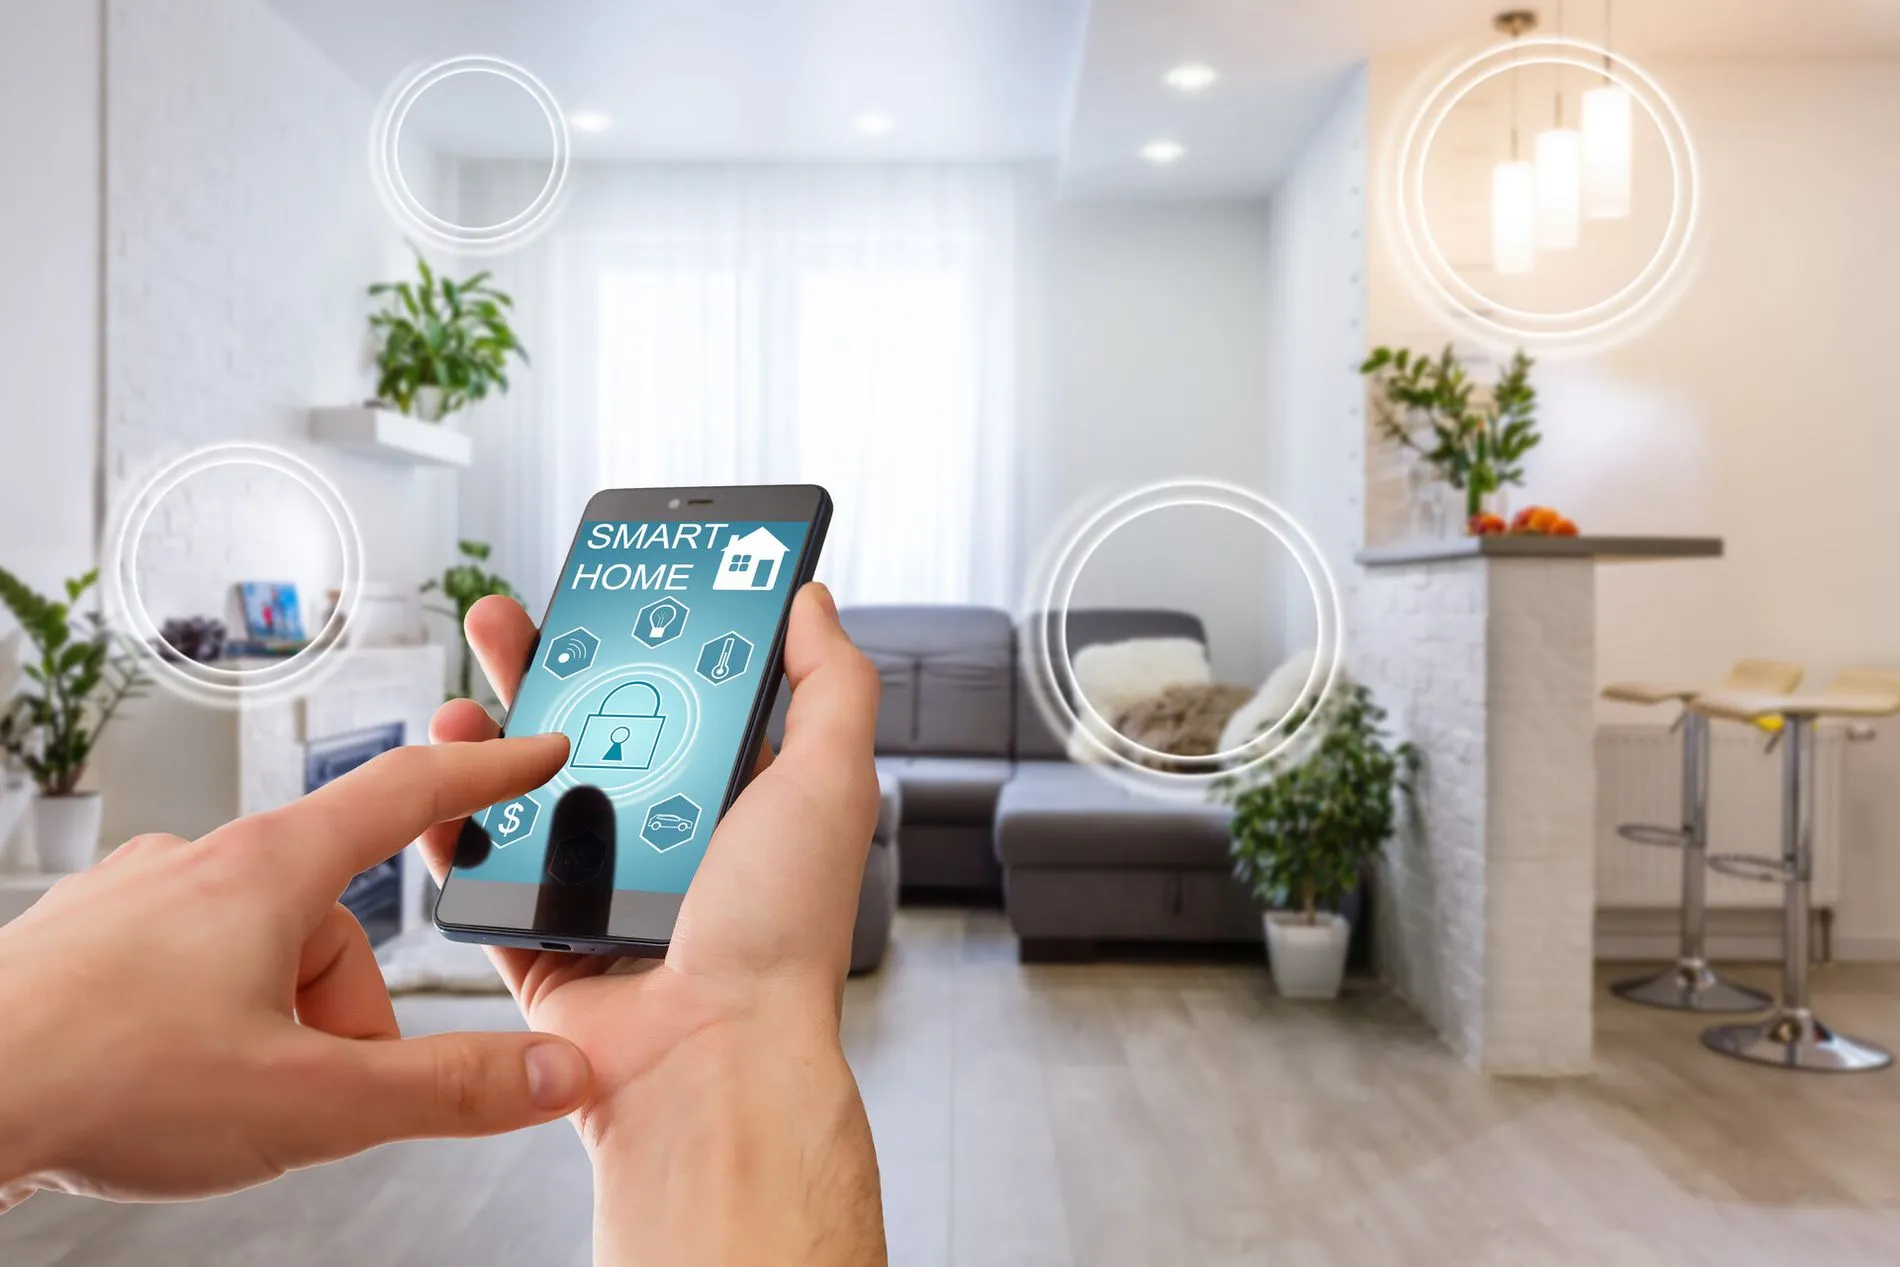 Smart home technology interface on smartphone app screen with augmented reality (AR) view of internet of things (IOT) connected objects in the apartment interior, person holding device.jpg